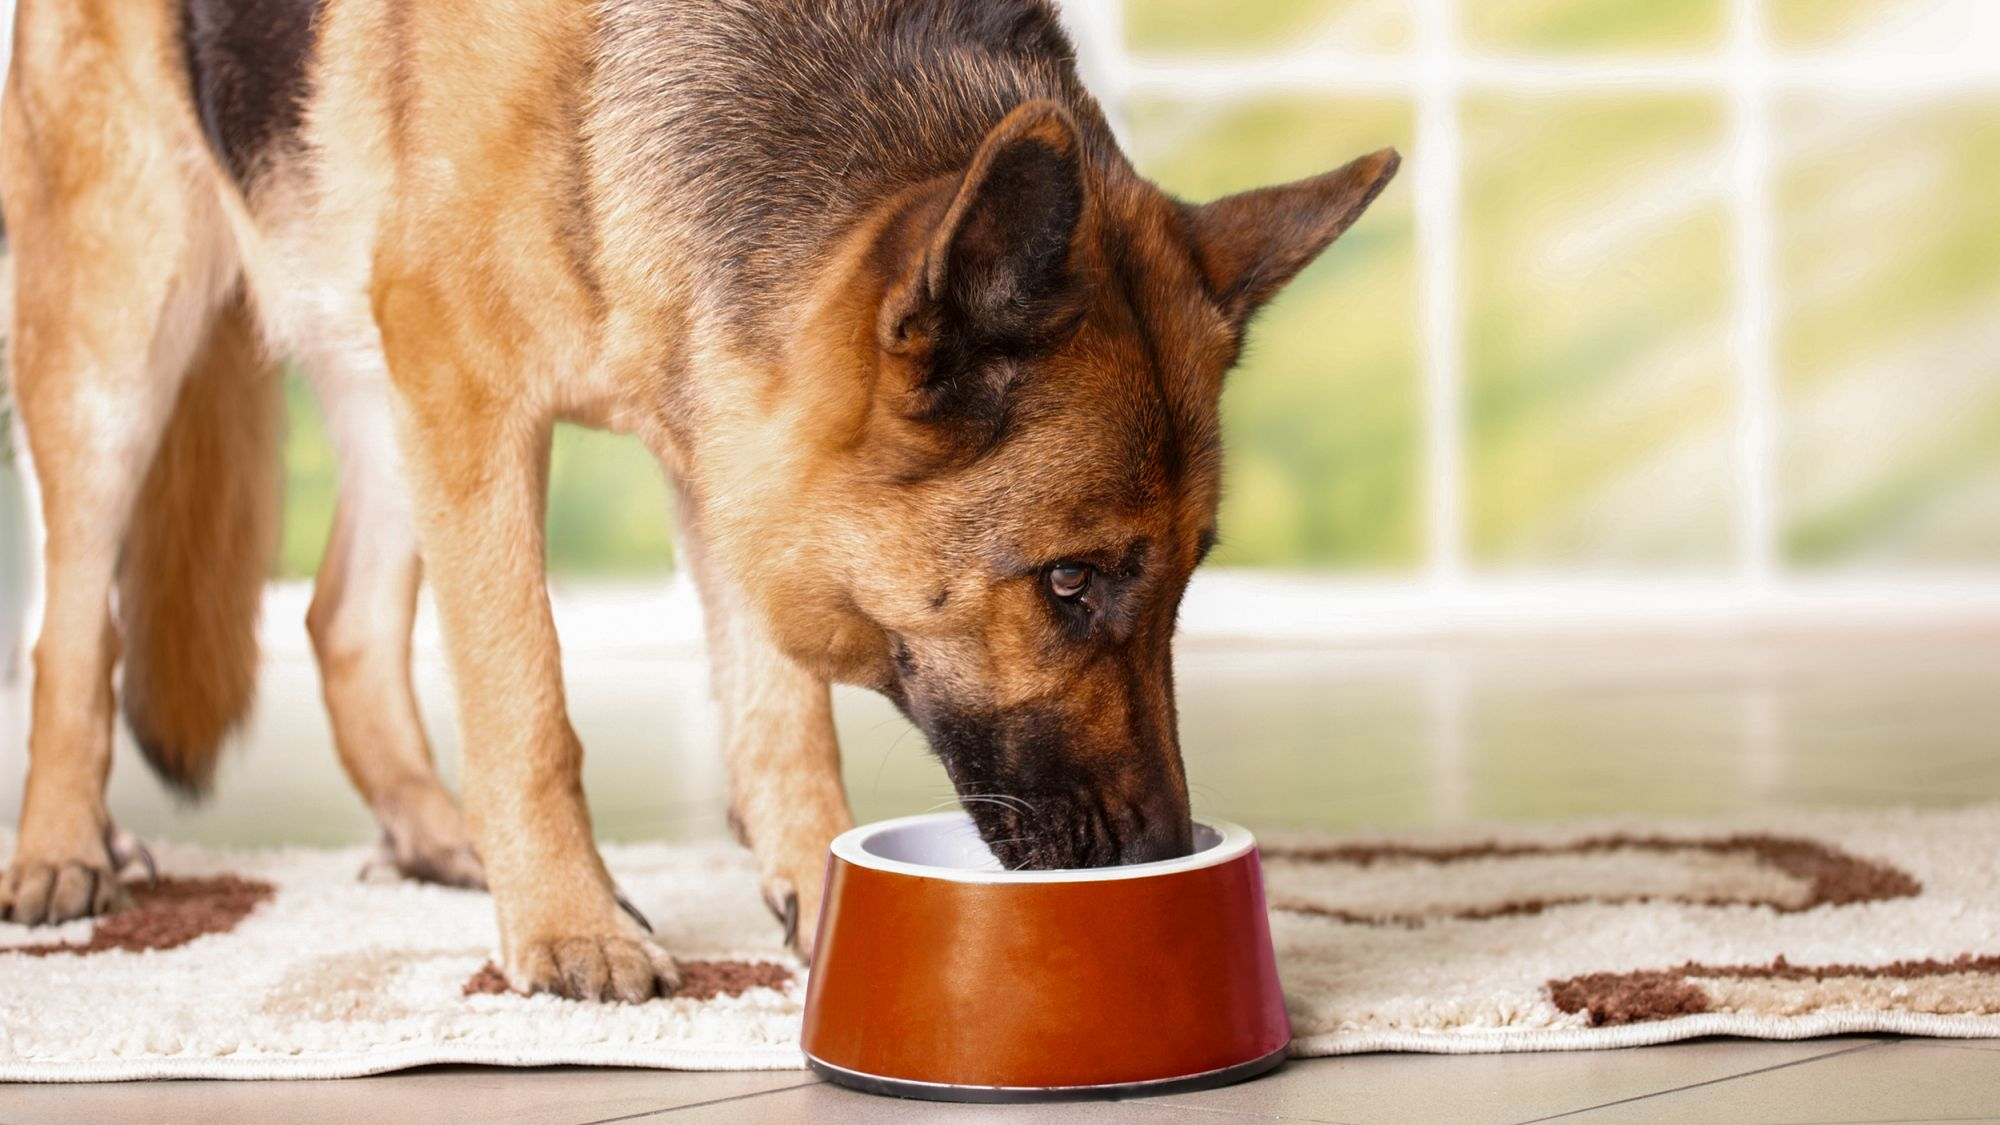 German Shepherd adult eating from a red bowl